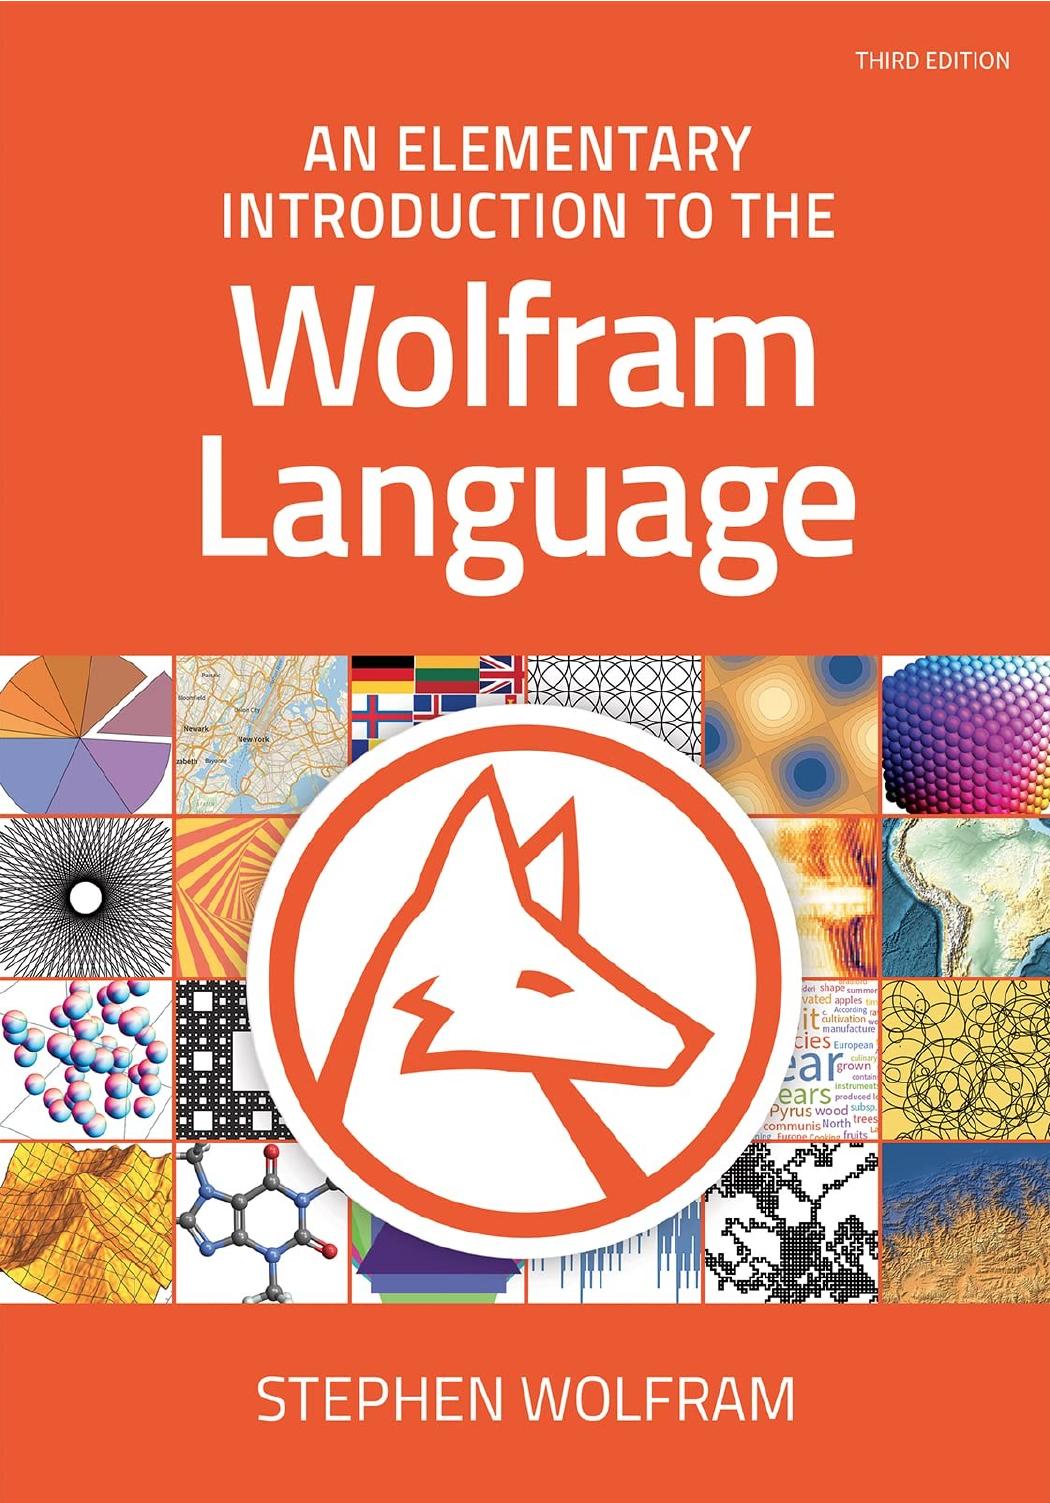 An Elementary Introduction to the Wolfram Language - Third Edition